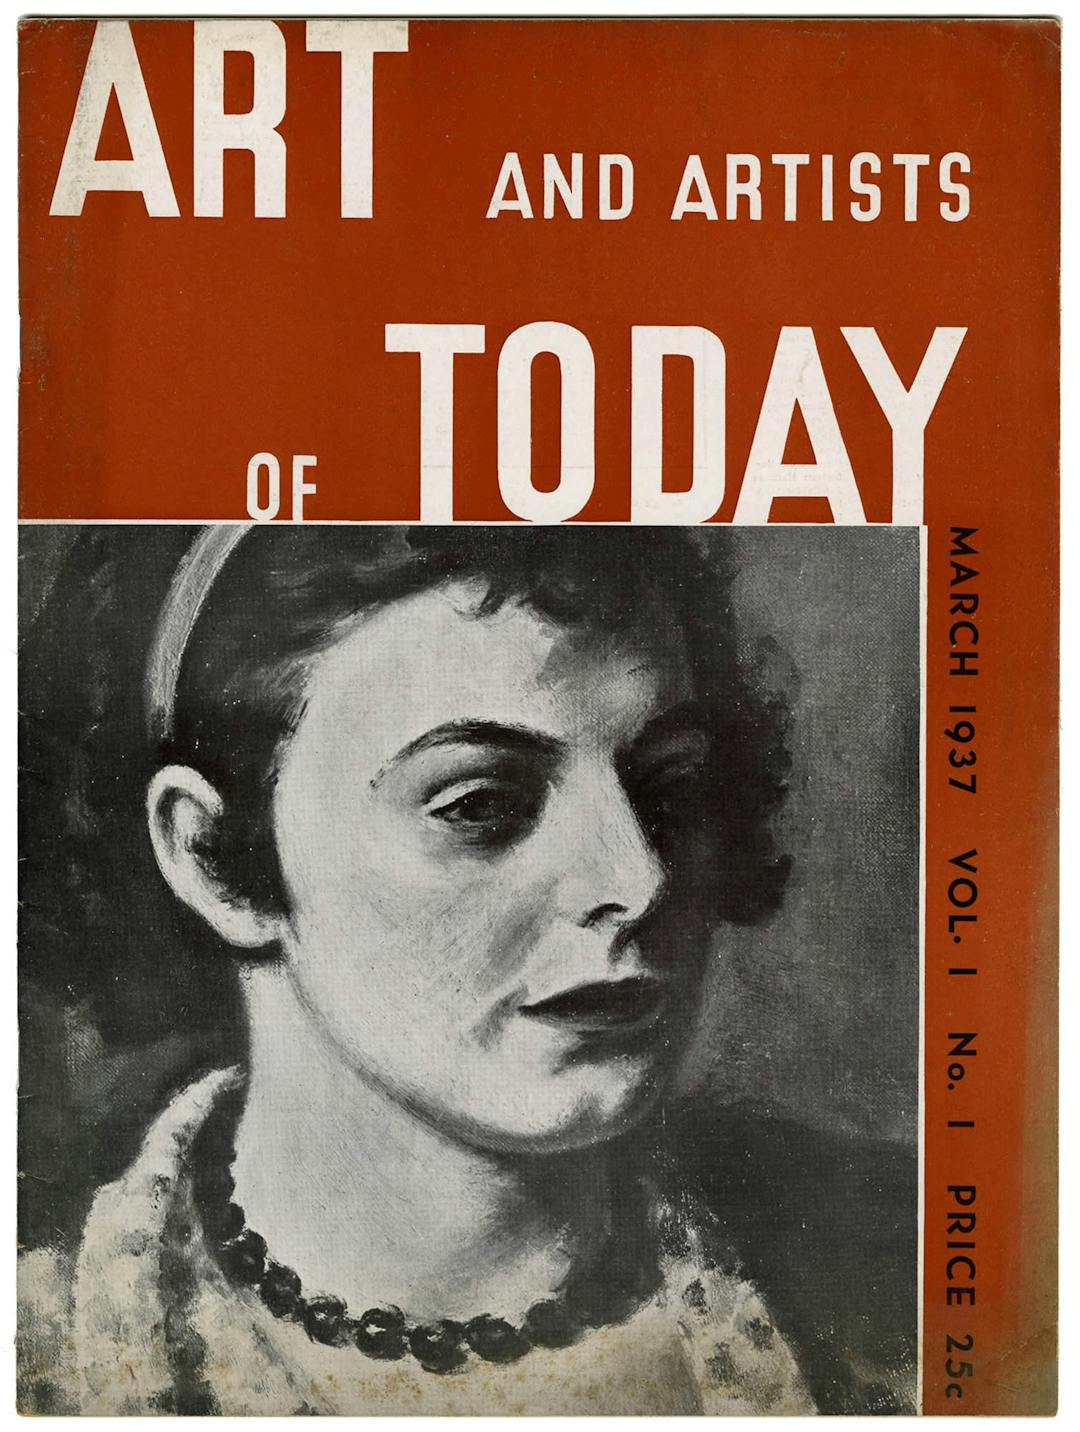 Art and Artists of Today, Vol. 1 no. 1, March 1937 – The Richard Pousette-Dart Foundation